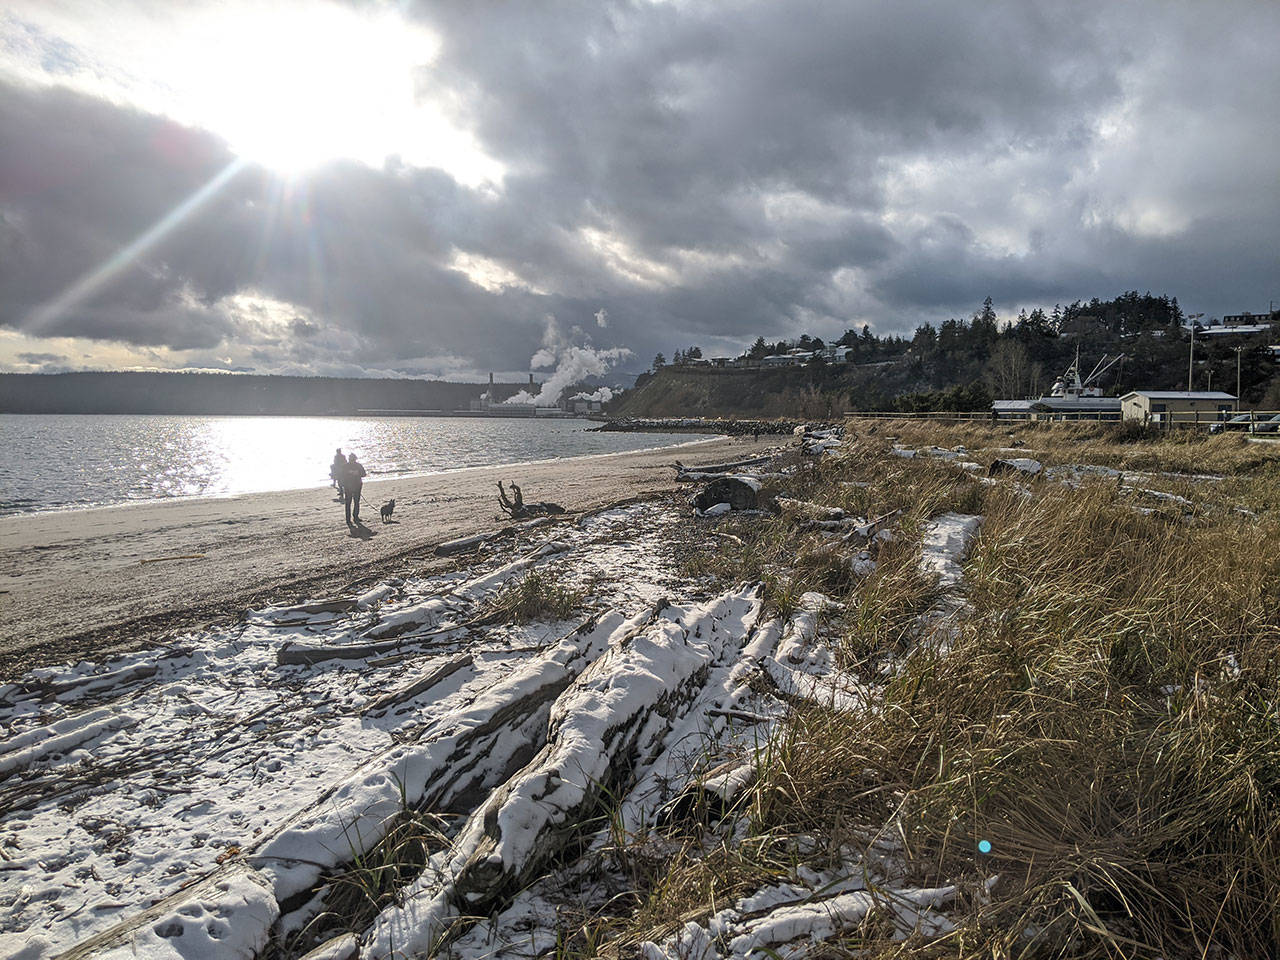 Residents enjoy the sun and snow as they walked along the beach near Boat Haven Marina in Port Townsend on Tuesday afternoon. (Zach Jablonski/Peninsula Daily News)